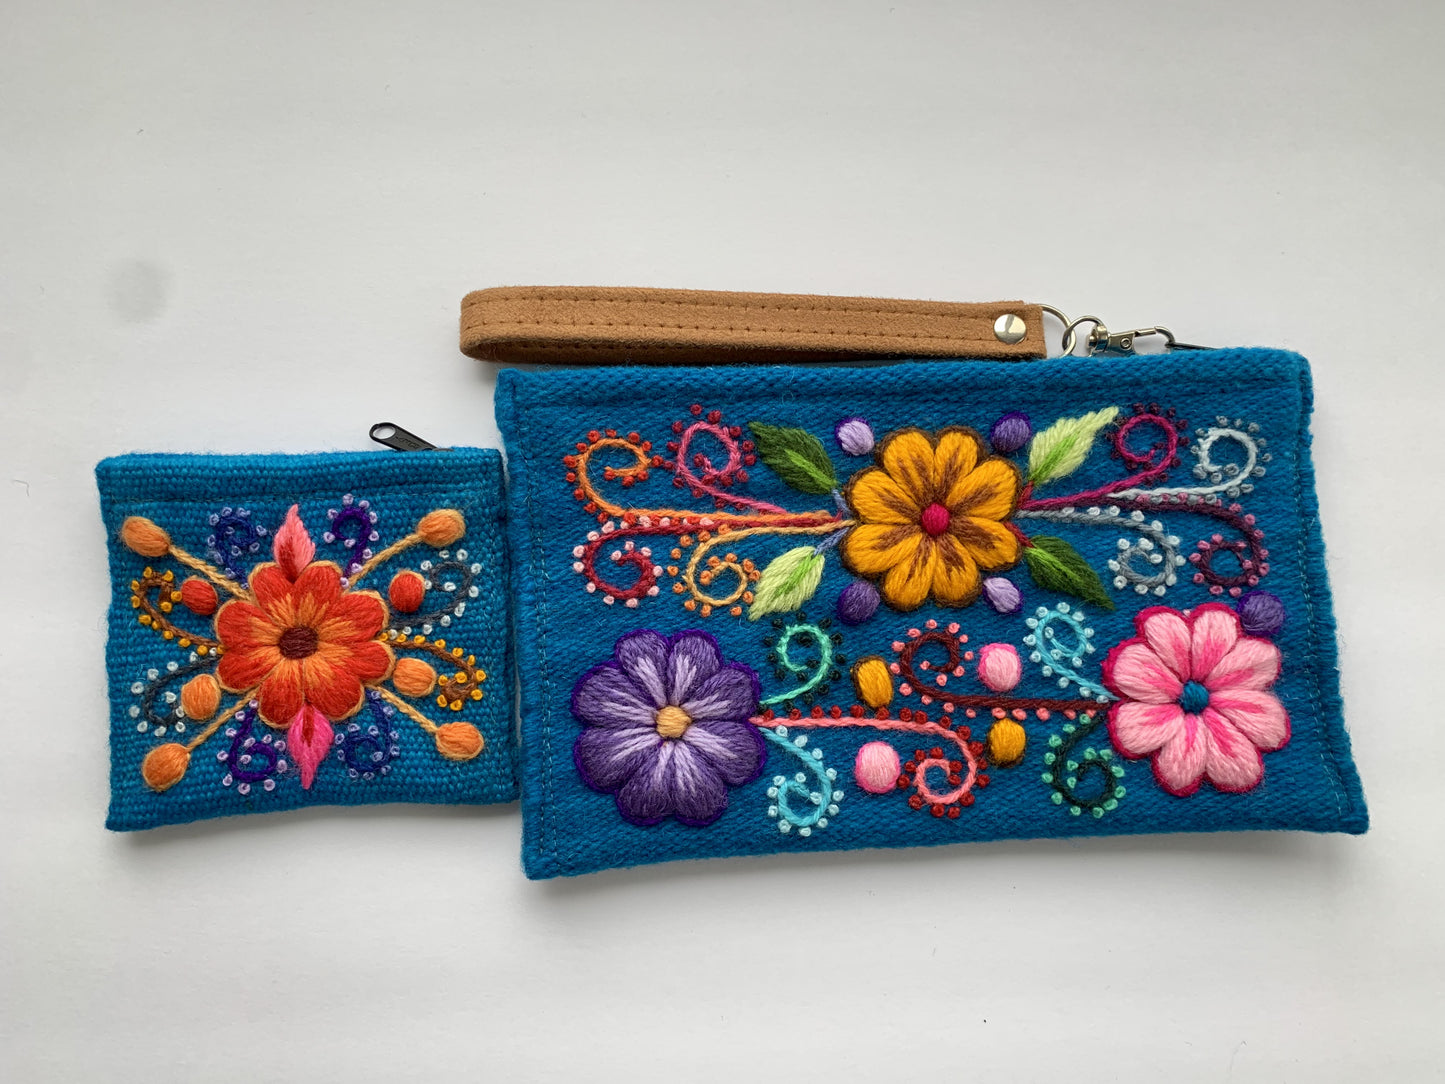 Embroidered wallet and coin pouch Mariana